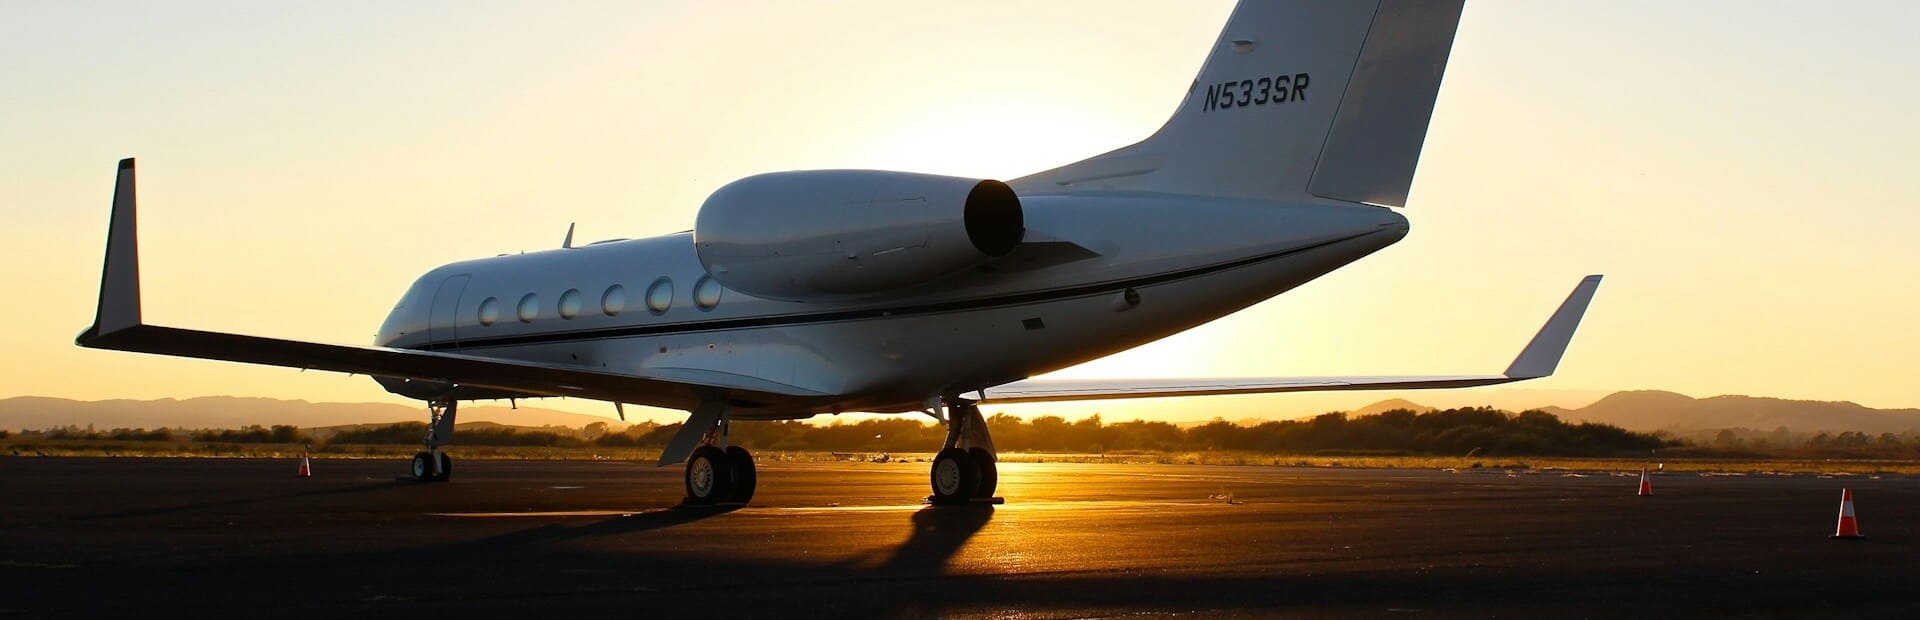 Private Jet and Airplane Landing Points in Portugal